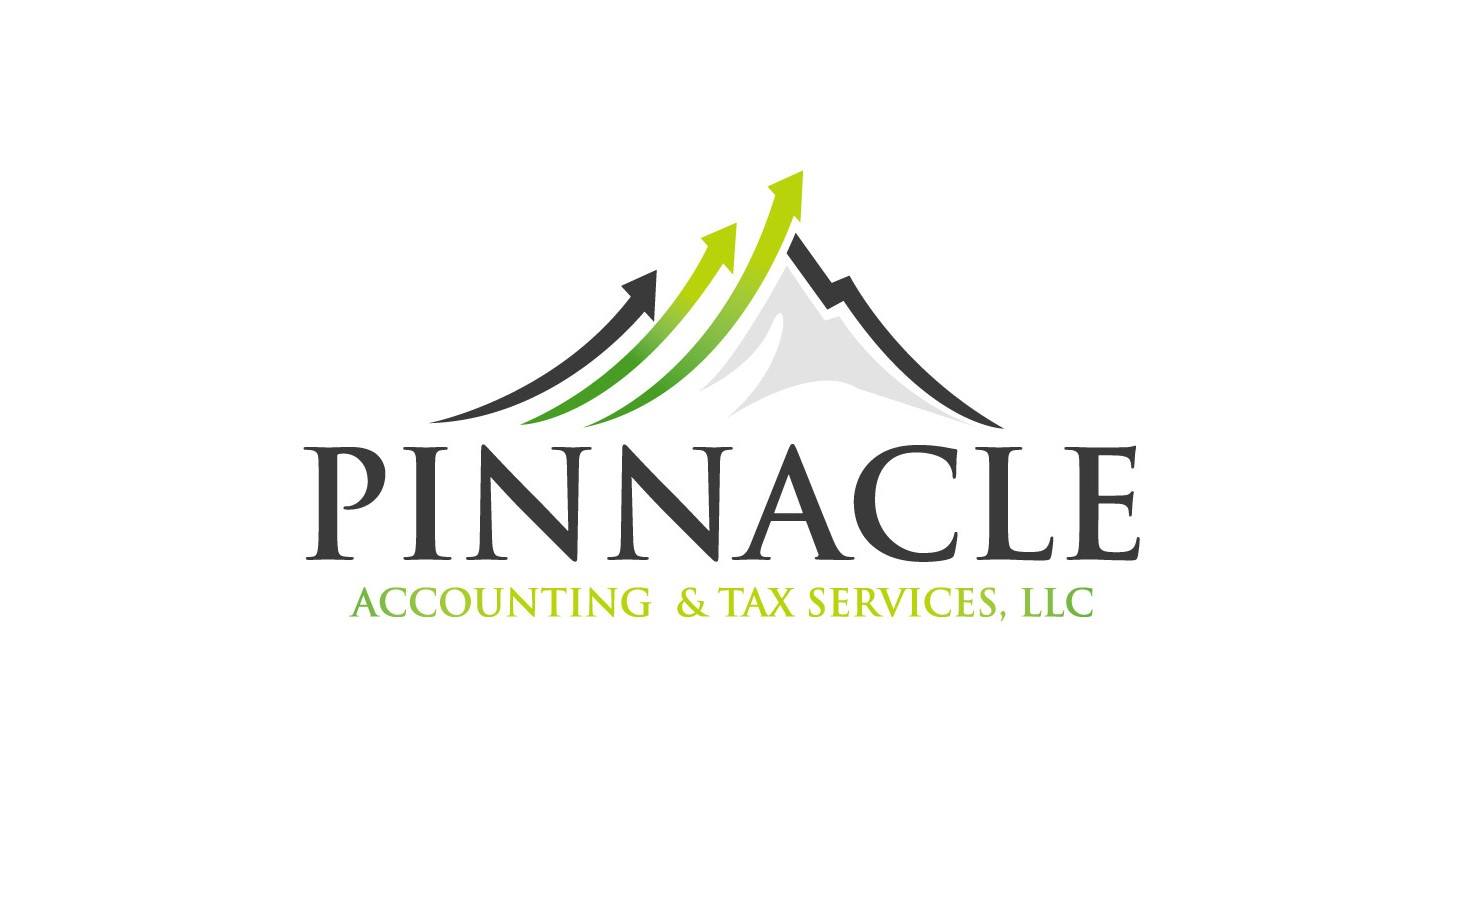 Pinnacle Accounting & Tax Services 8 Old Bridge Turnpike Suite 5, South River New Jersey 08882